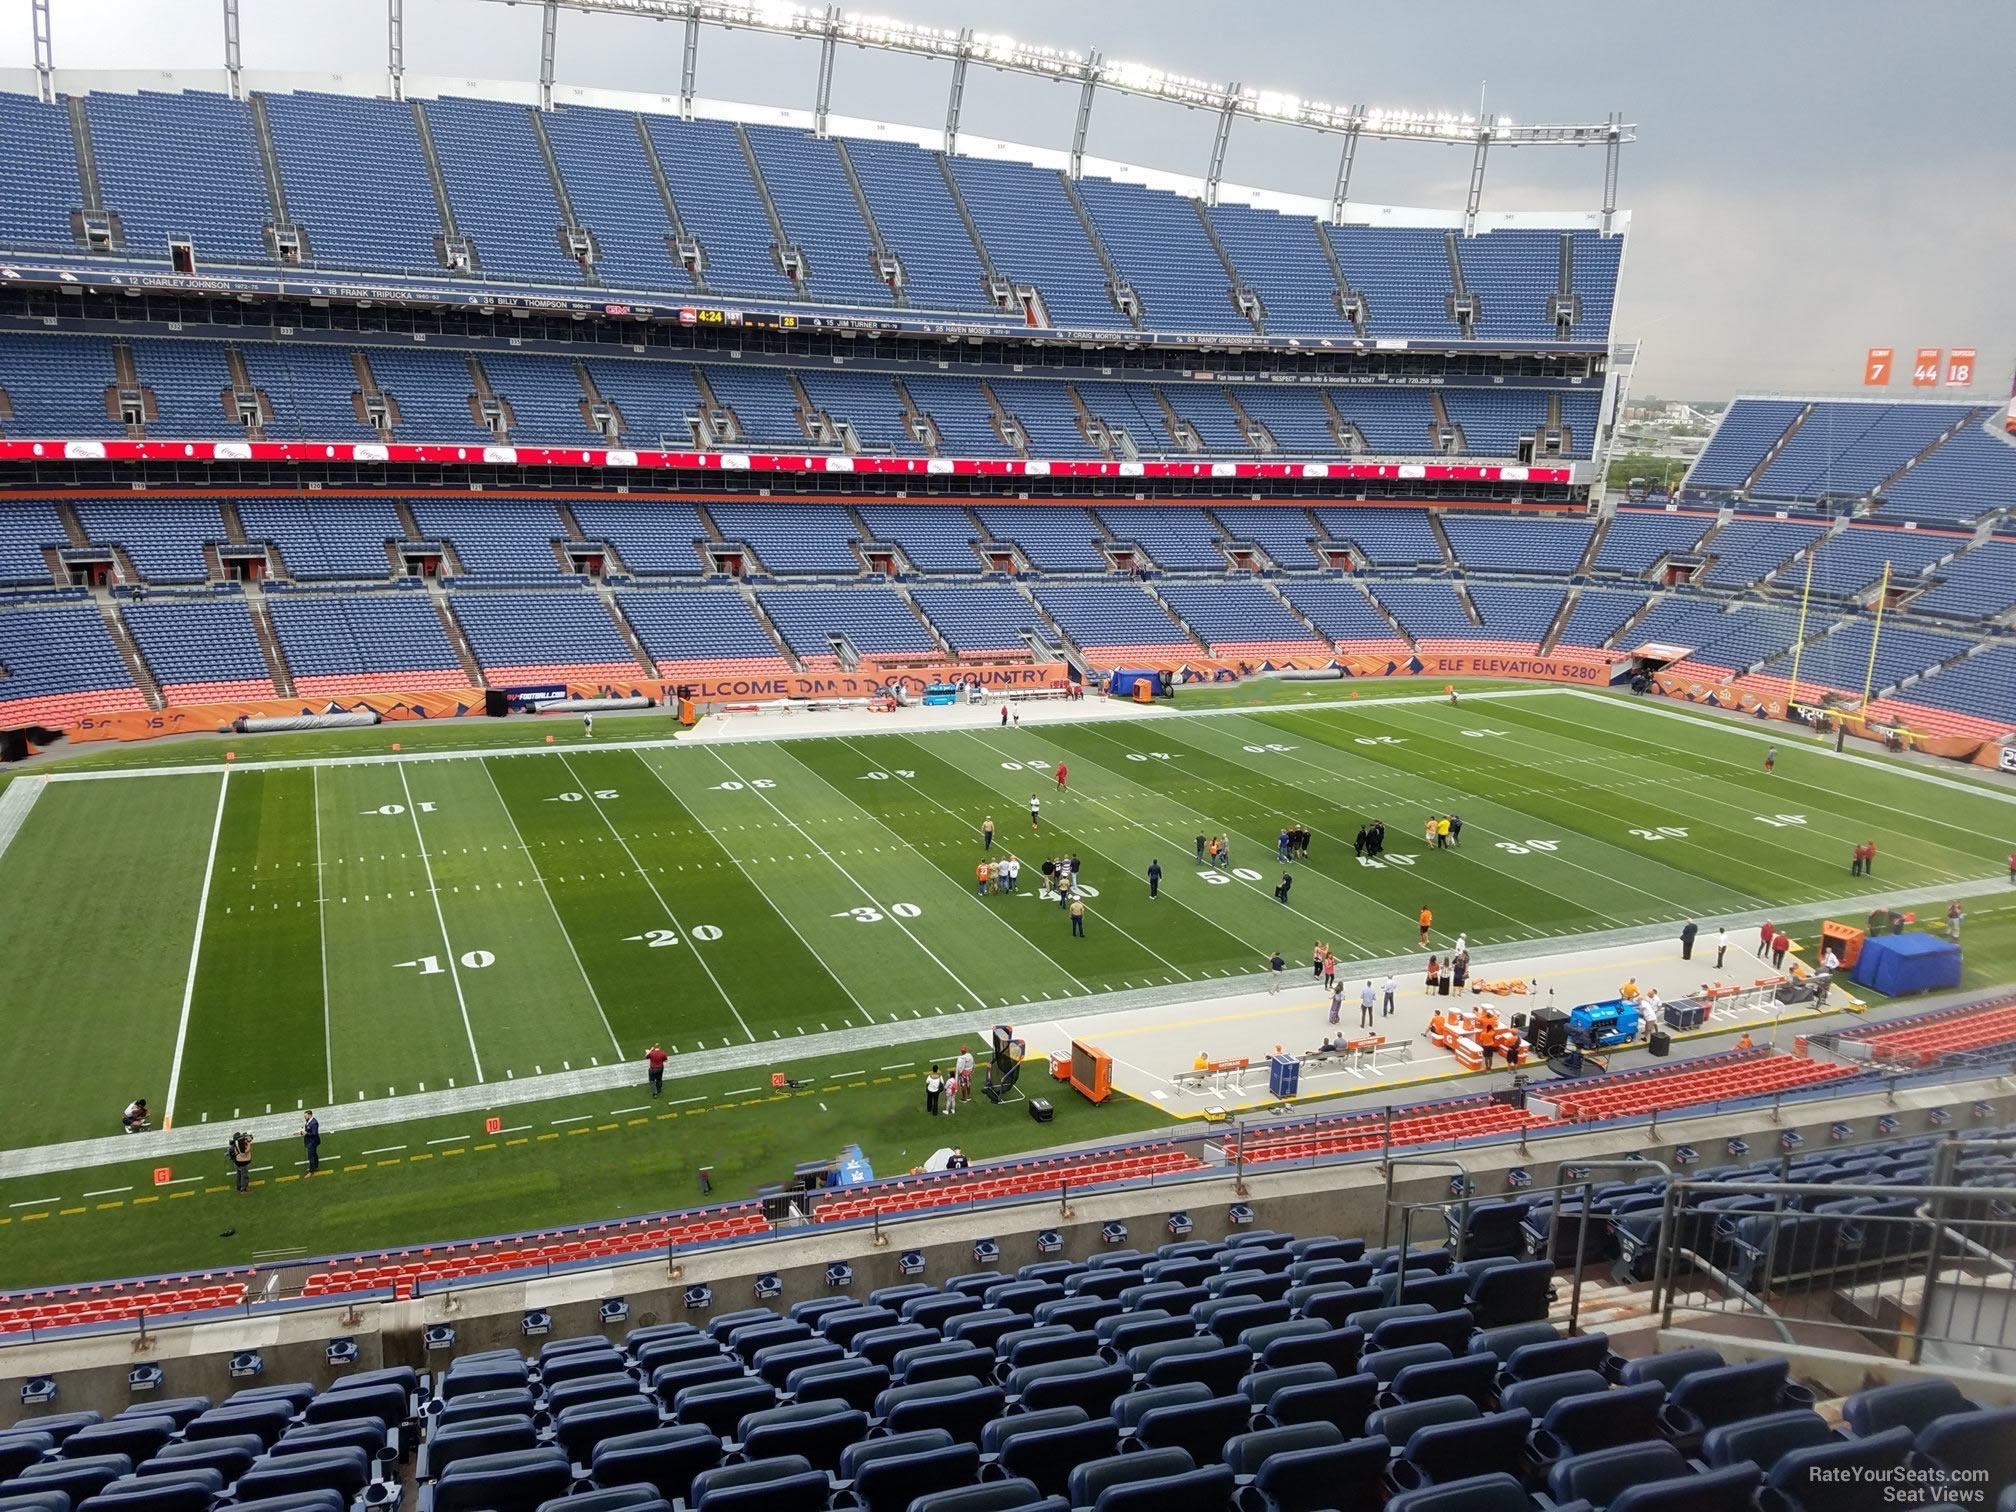 section 313, row 12 seat view  - empower field (at mile high)